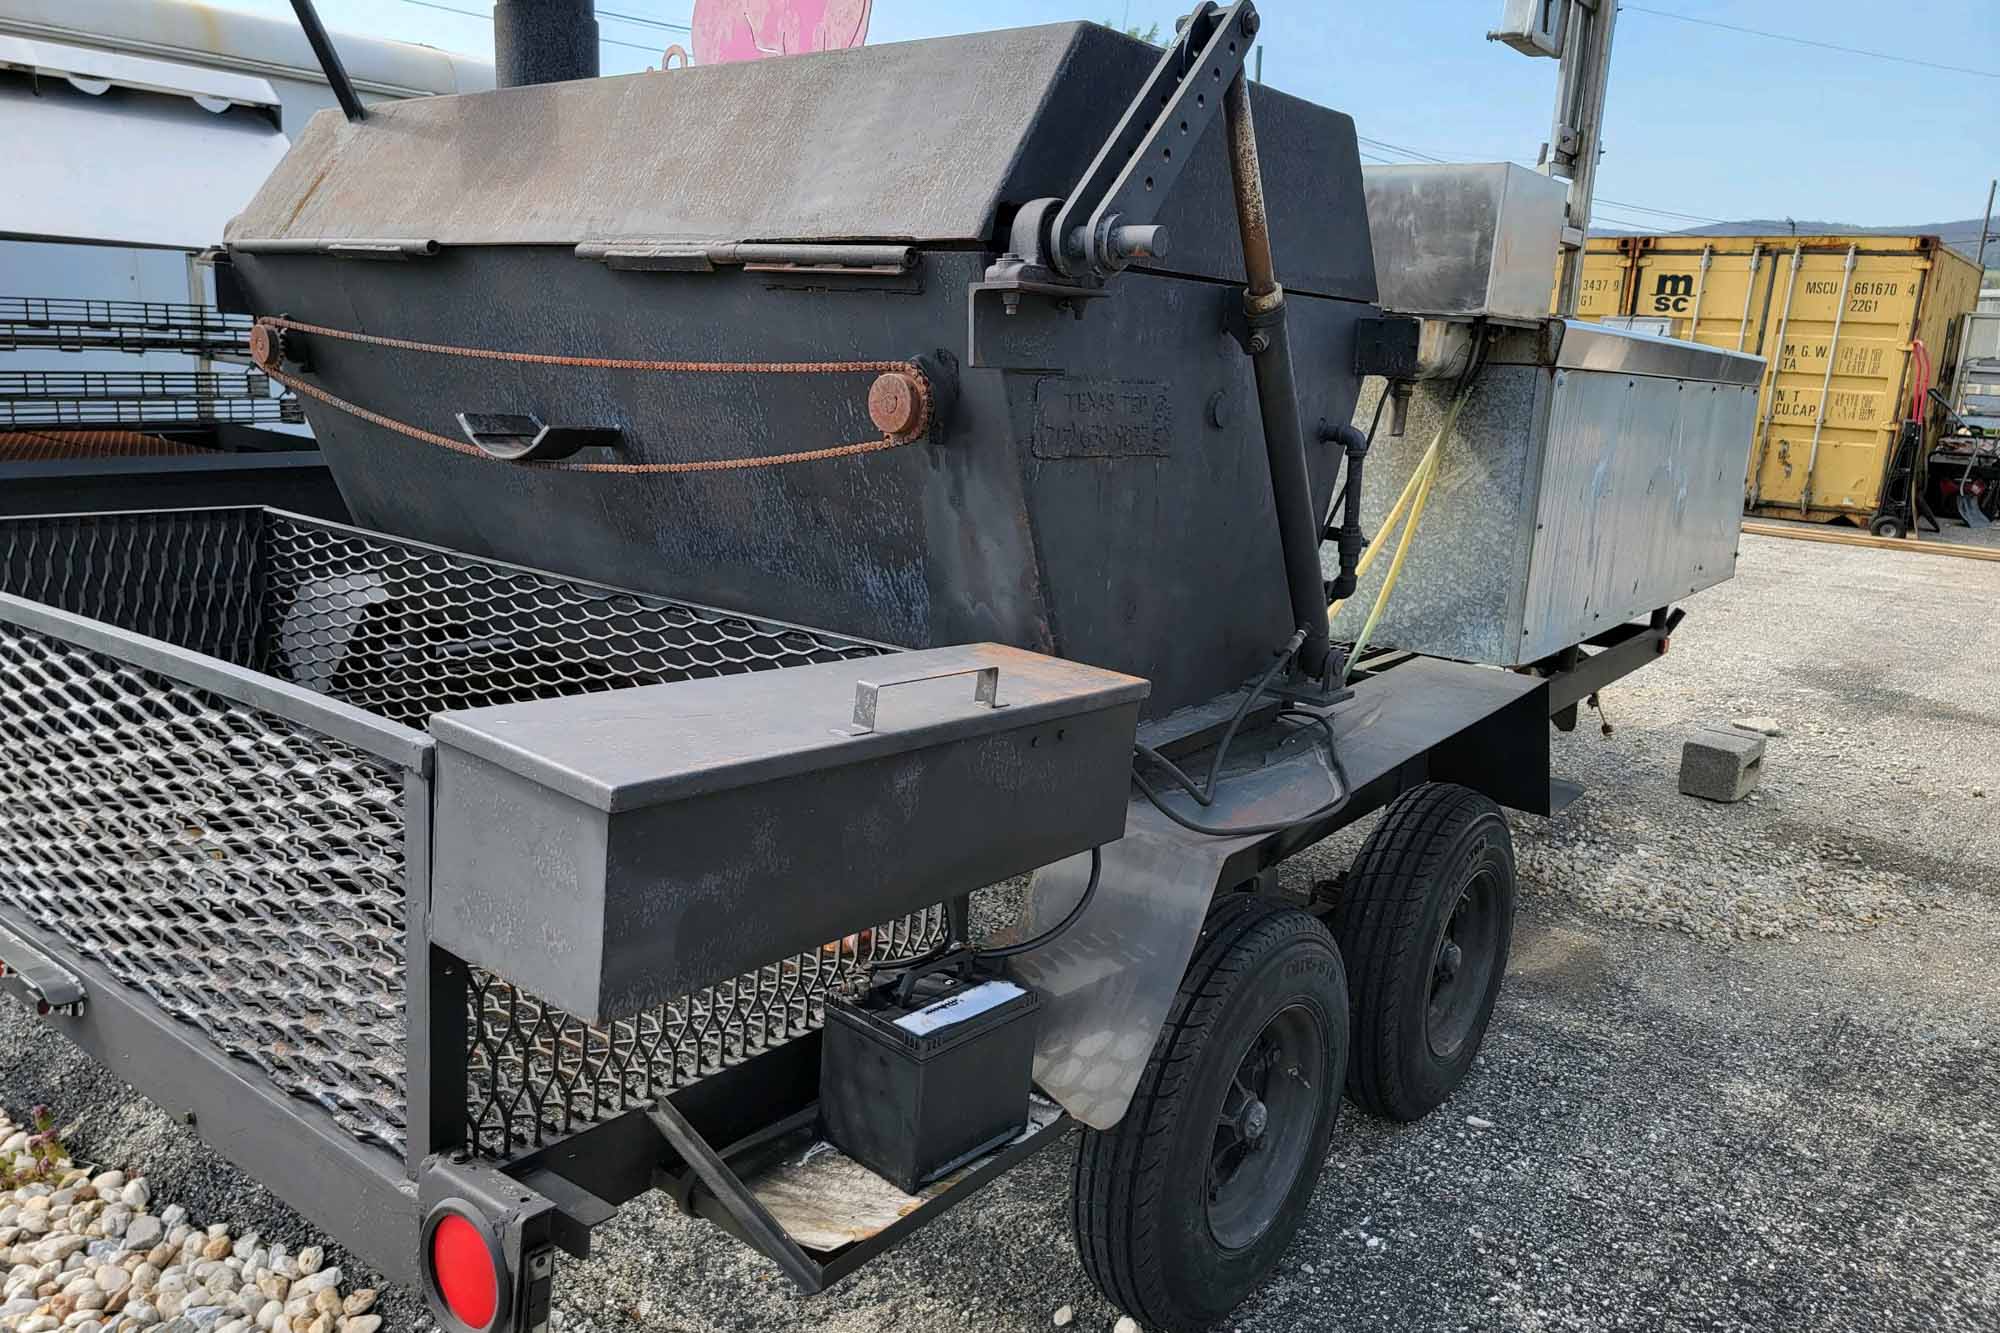 20' Double-Axle Trailer With 6' x 3' Smoker, a 2' x 3' Smoker, Stainless Steel Table, and 3-Bowl Sink